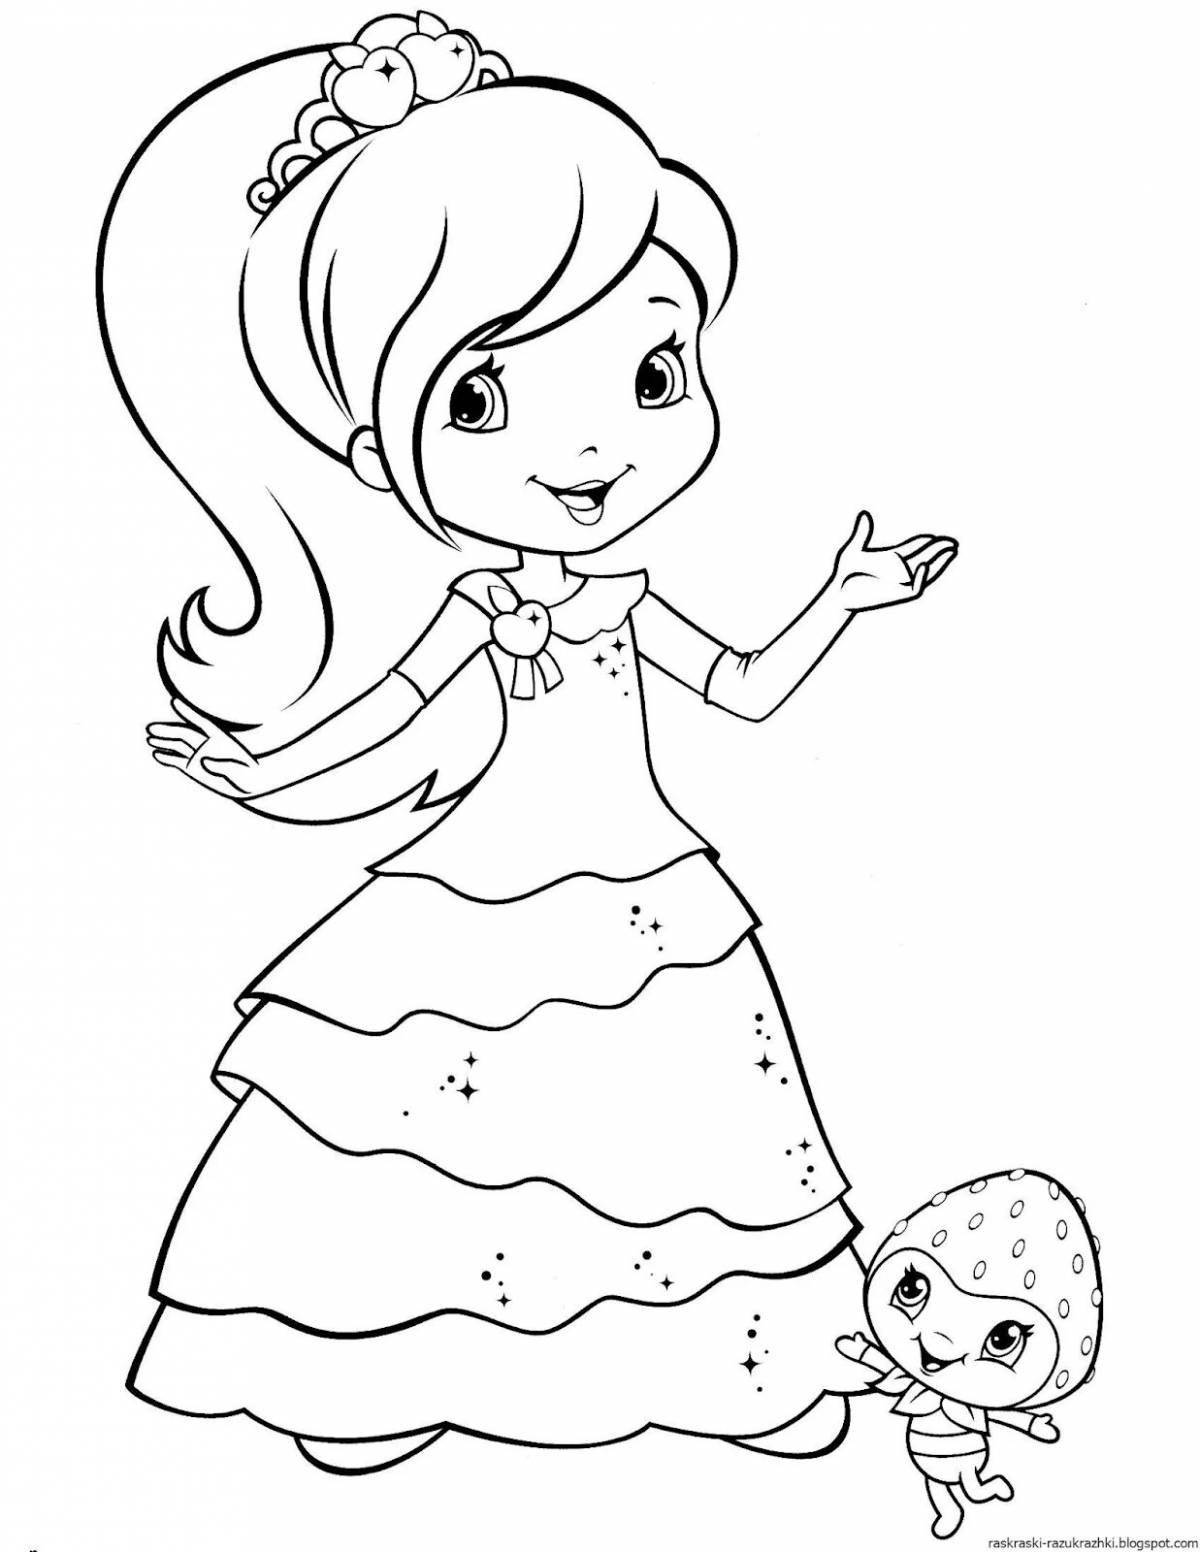 Fabulous princess coloring pages for girls 4-5 years old